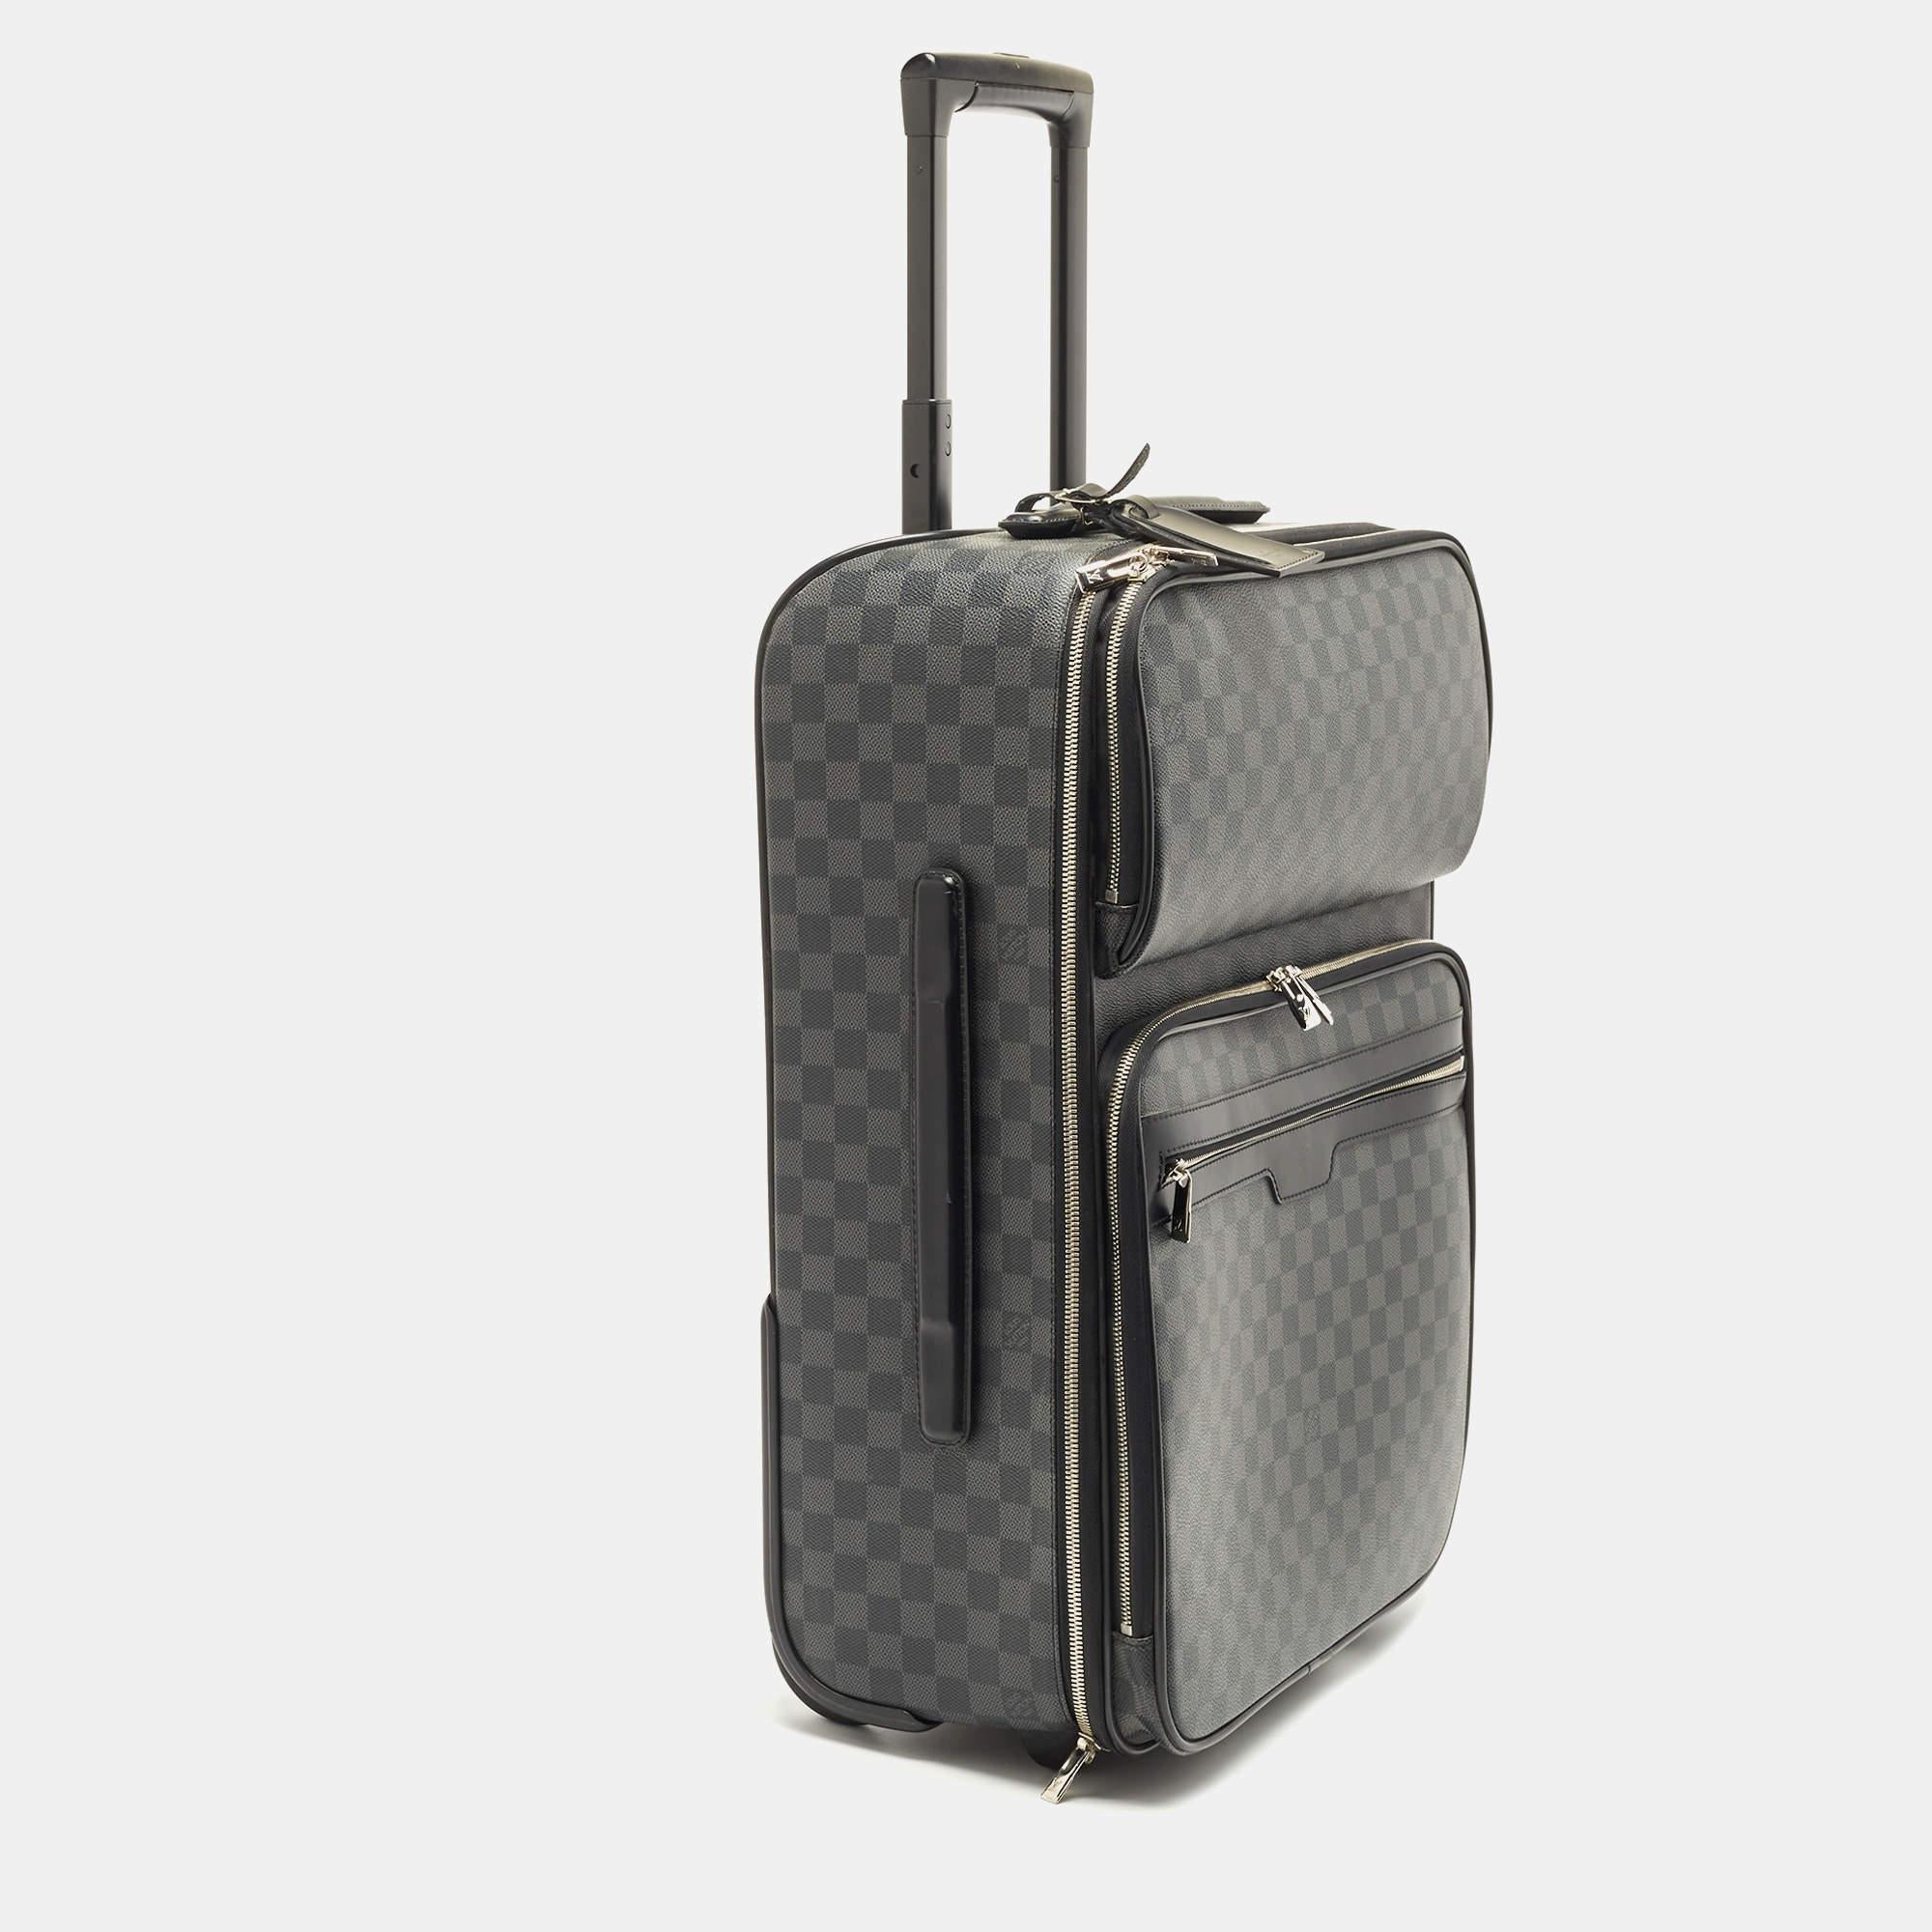 This creation from the house of Louis Vuitton is an accessory you will turn to when you have travel plans. It has been crafted using the best kind of materials to be appealing as well as durable. It's a worthy investment.

